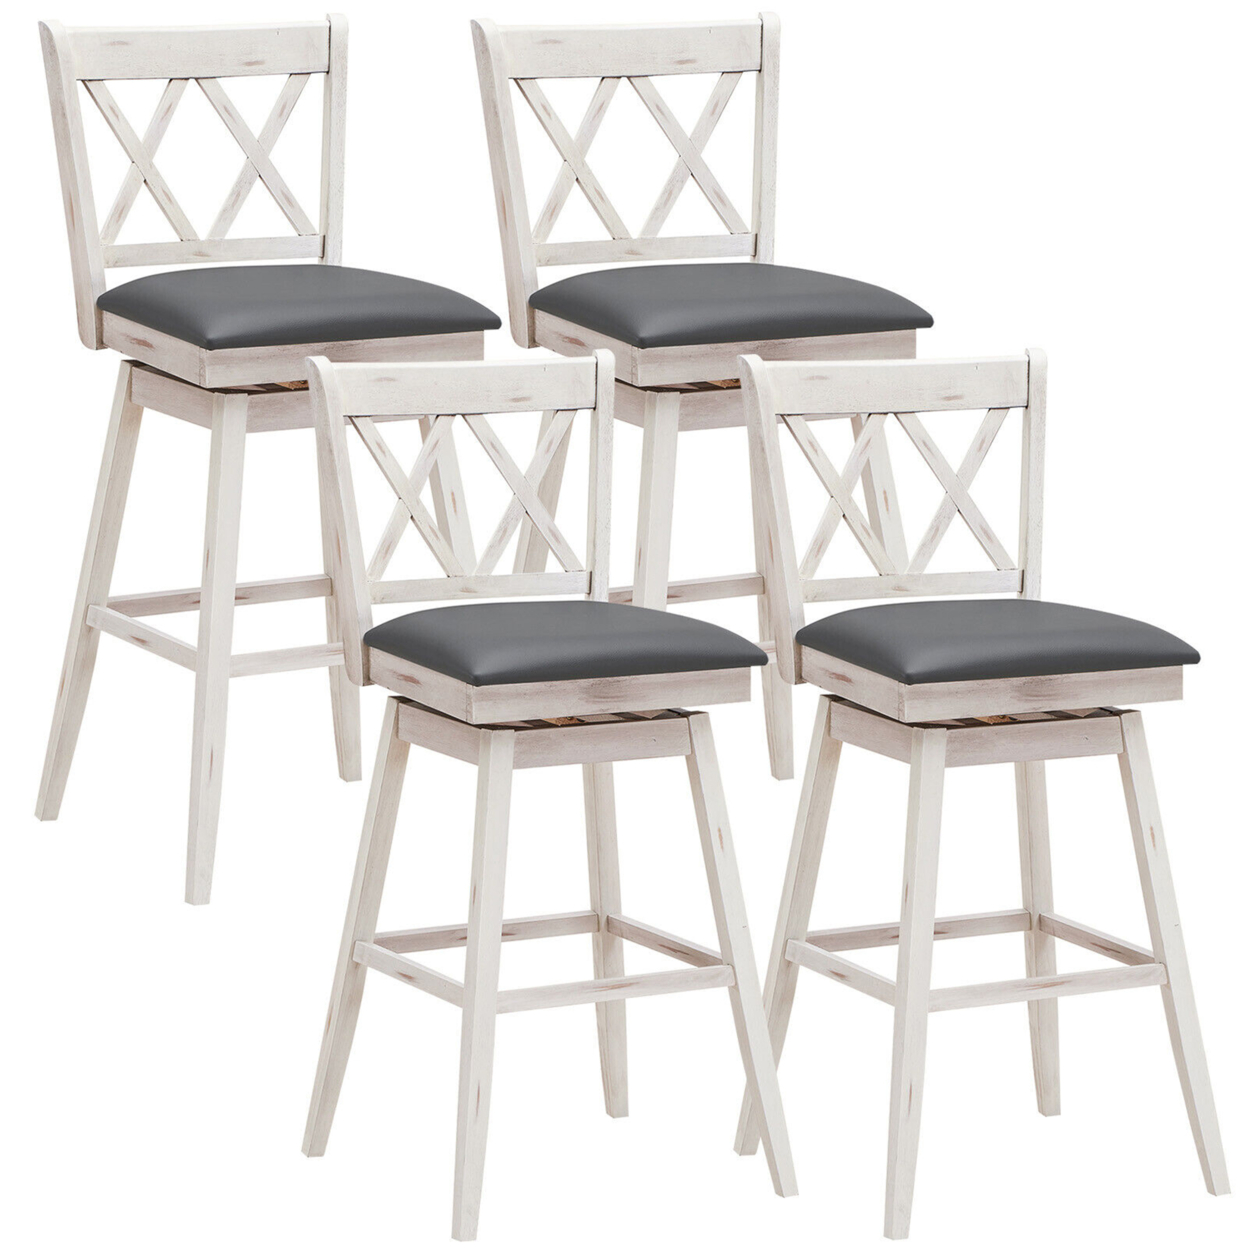 Set Of 4 Barstools Swivel Bar Height Chairs With Rubber Wood Legs - Antique White